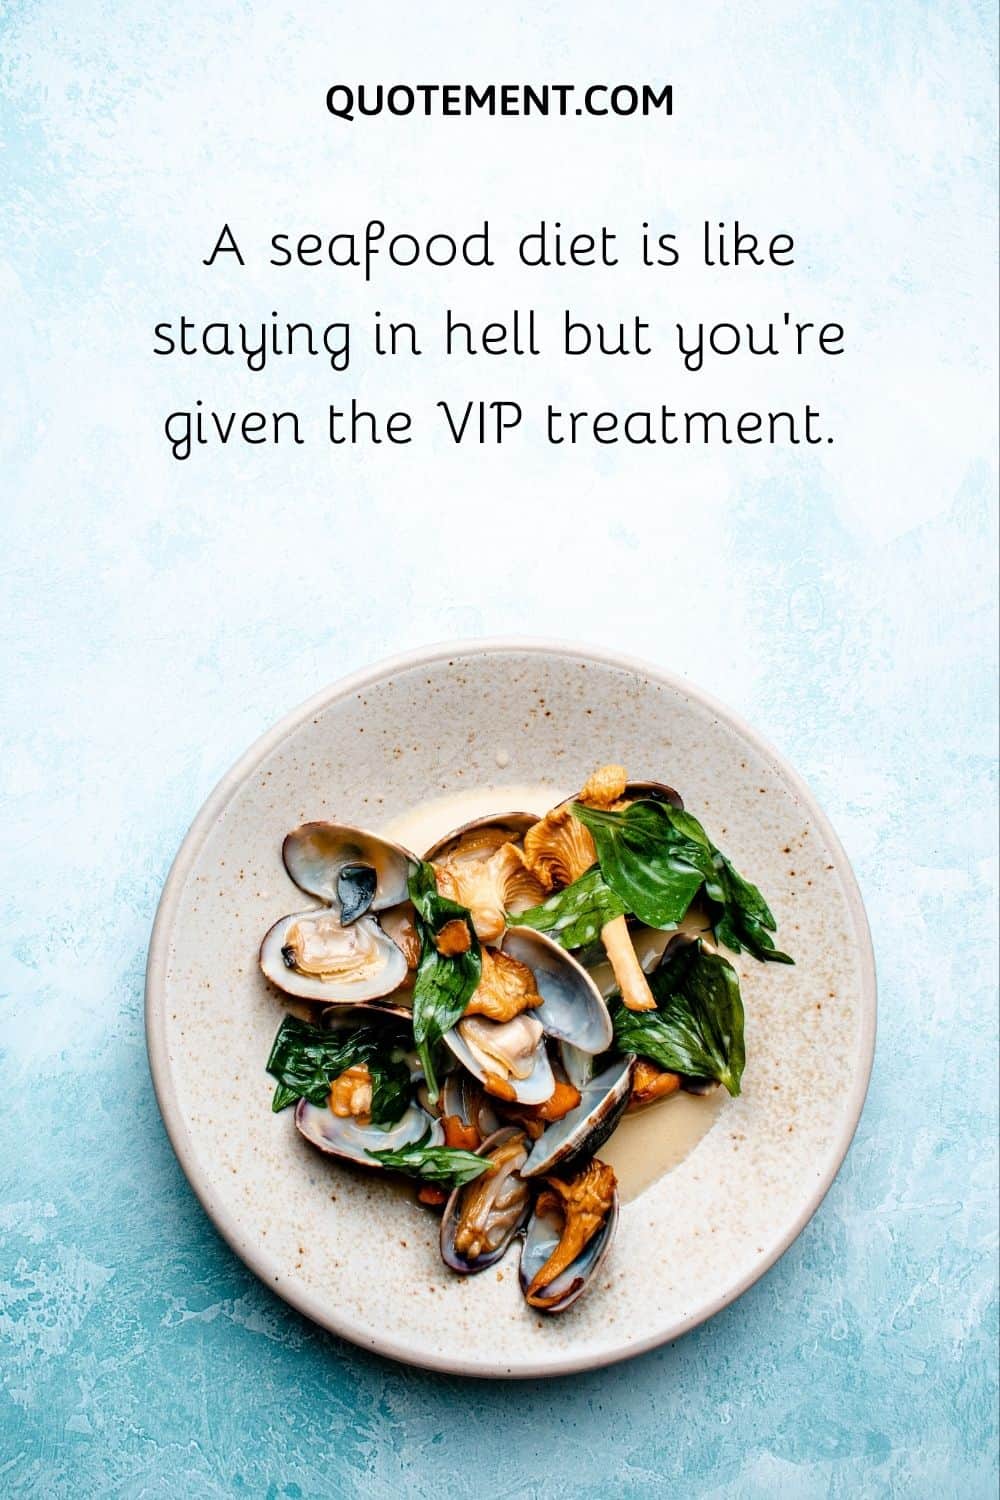 A seafood diet is like staying in hell but you’re given the VIP treatment.